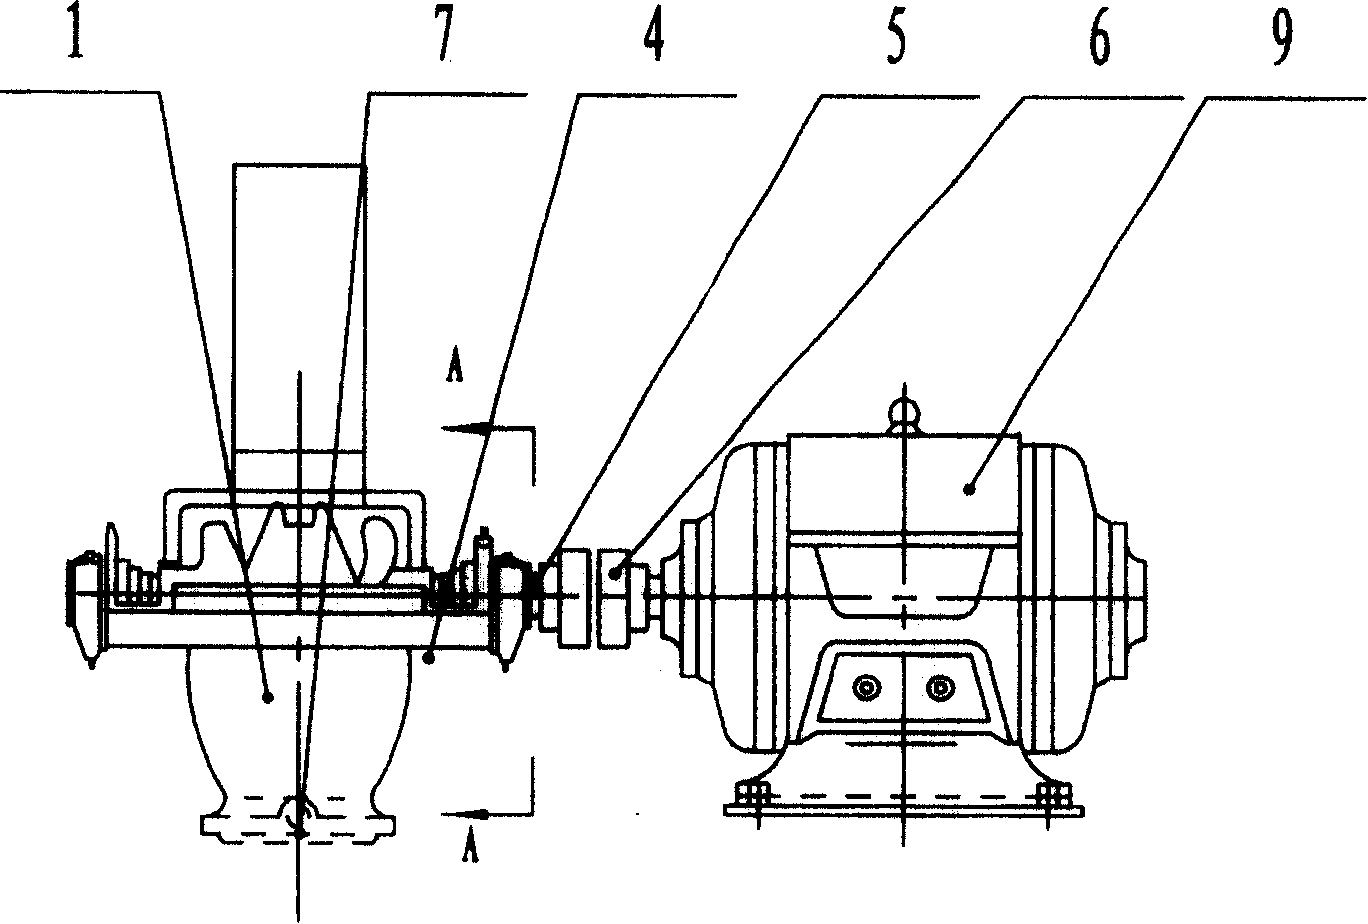 Central-mounted single-stage and multi-stage double-suction turbine synchronous suction and discharge pump